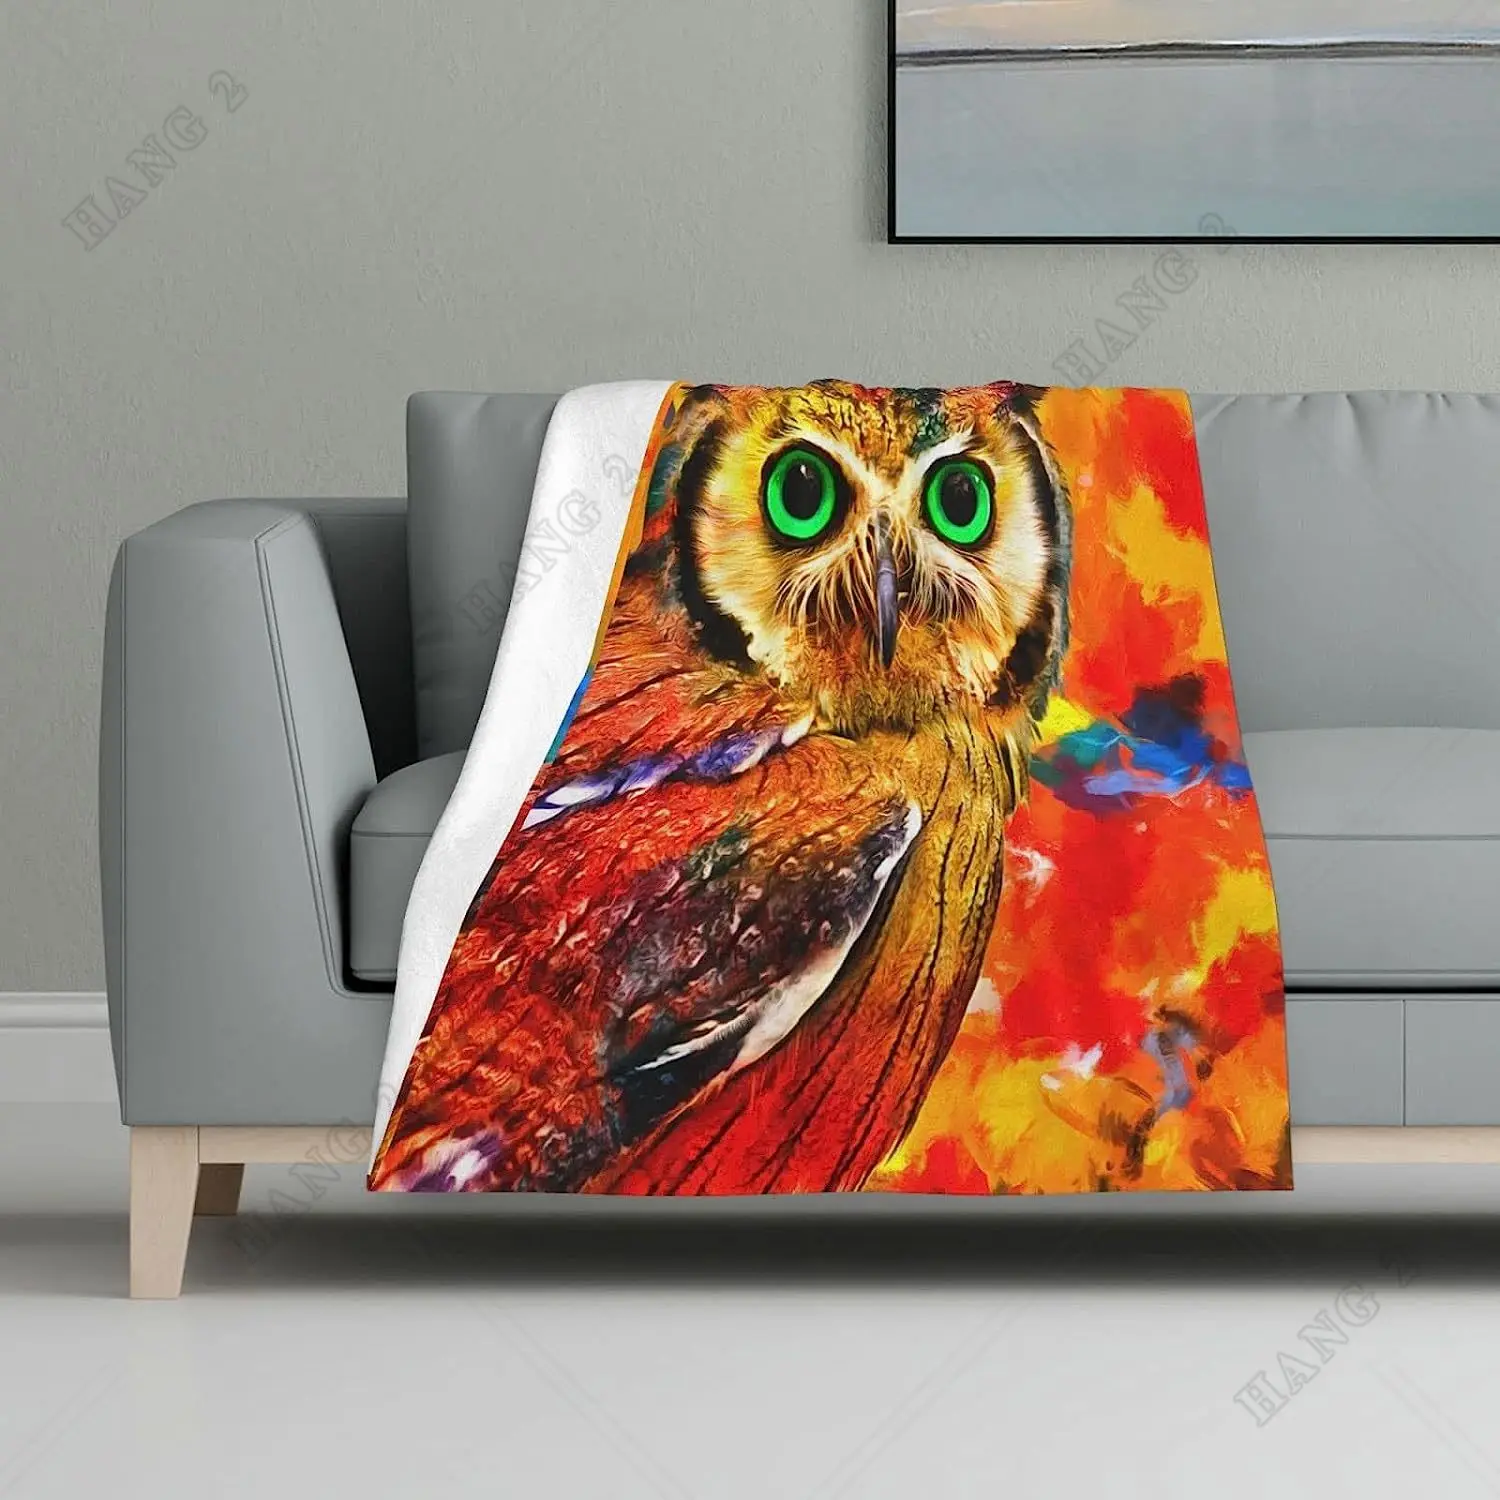 

Oriental Sharp Owl Watercolor Throw Blanket for Bed Couch Sofa Travelling Camping Super Soft and Warm Blanket for Men Women Kids